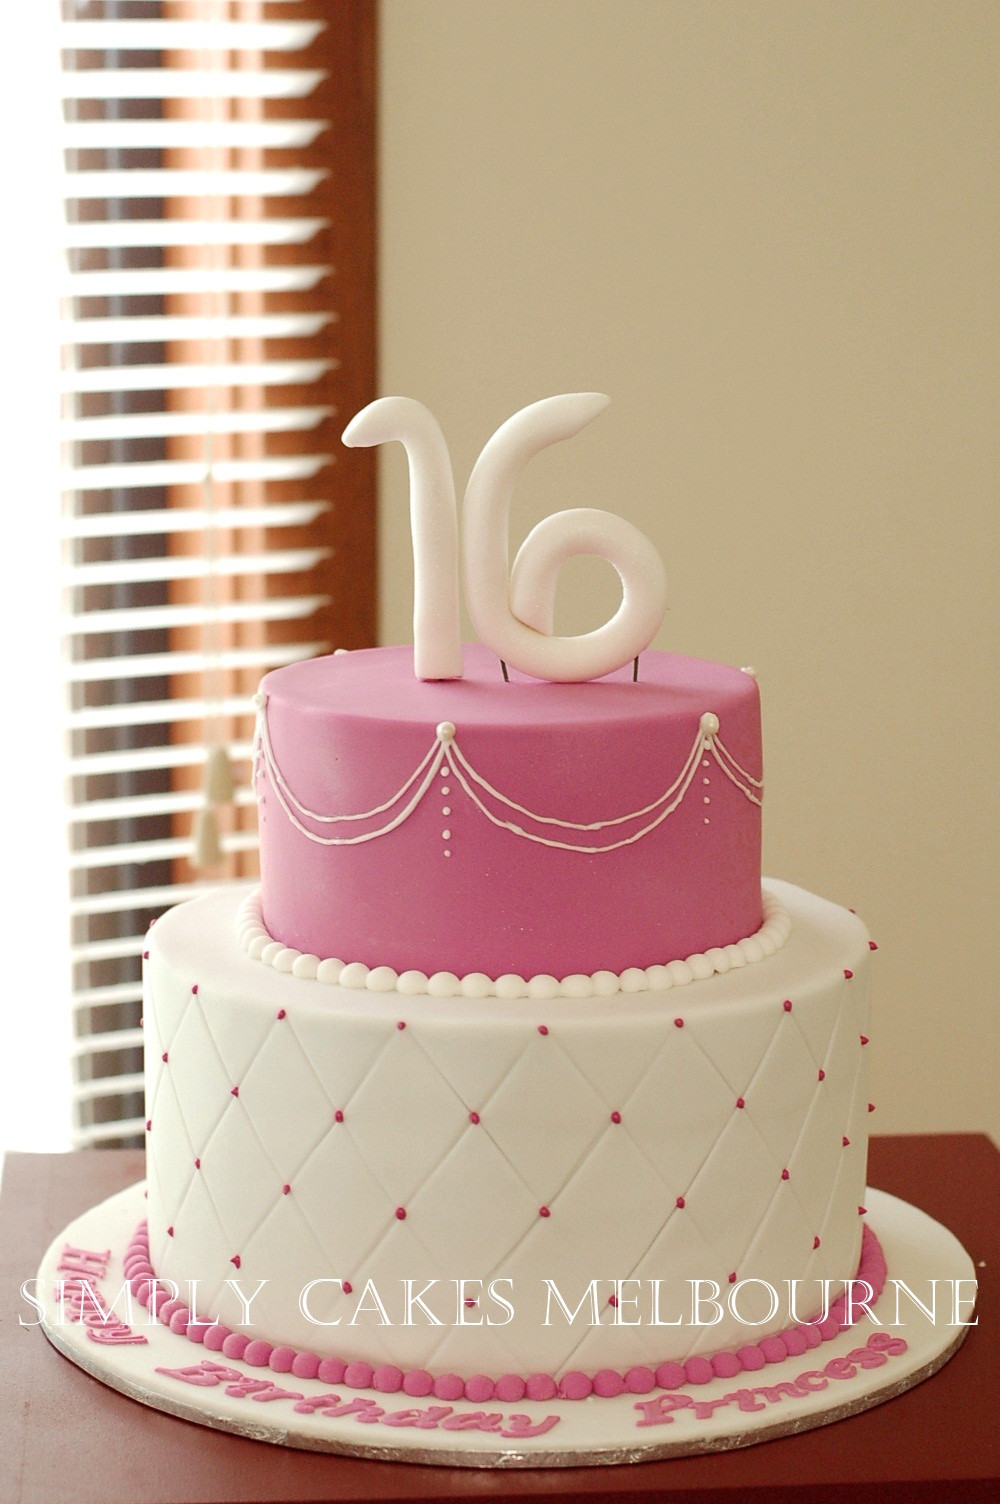 16th Birthday Cakes
 Simply Cakes Melbourne Princess cake themed for 16th birthday